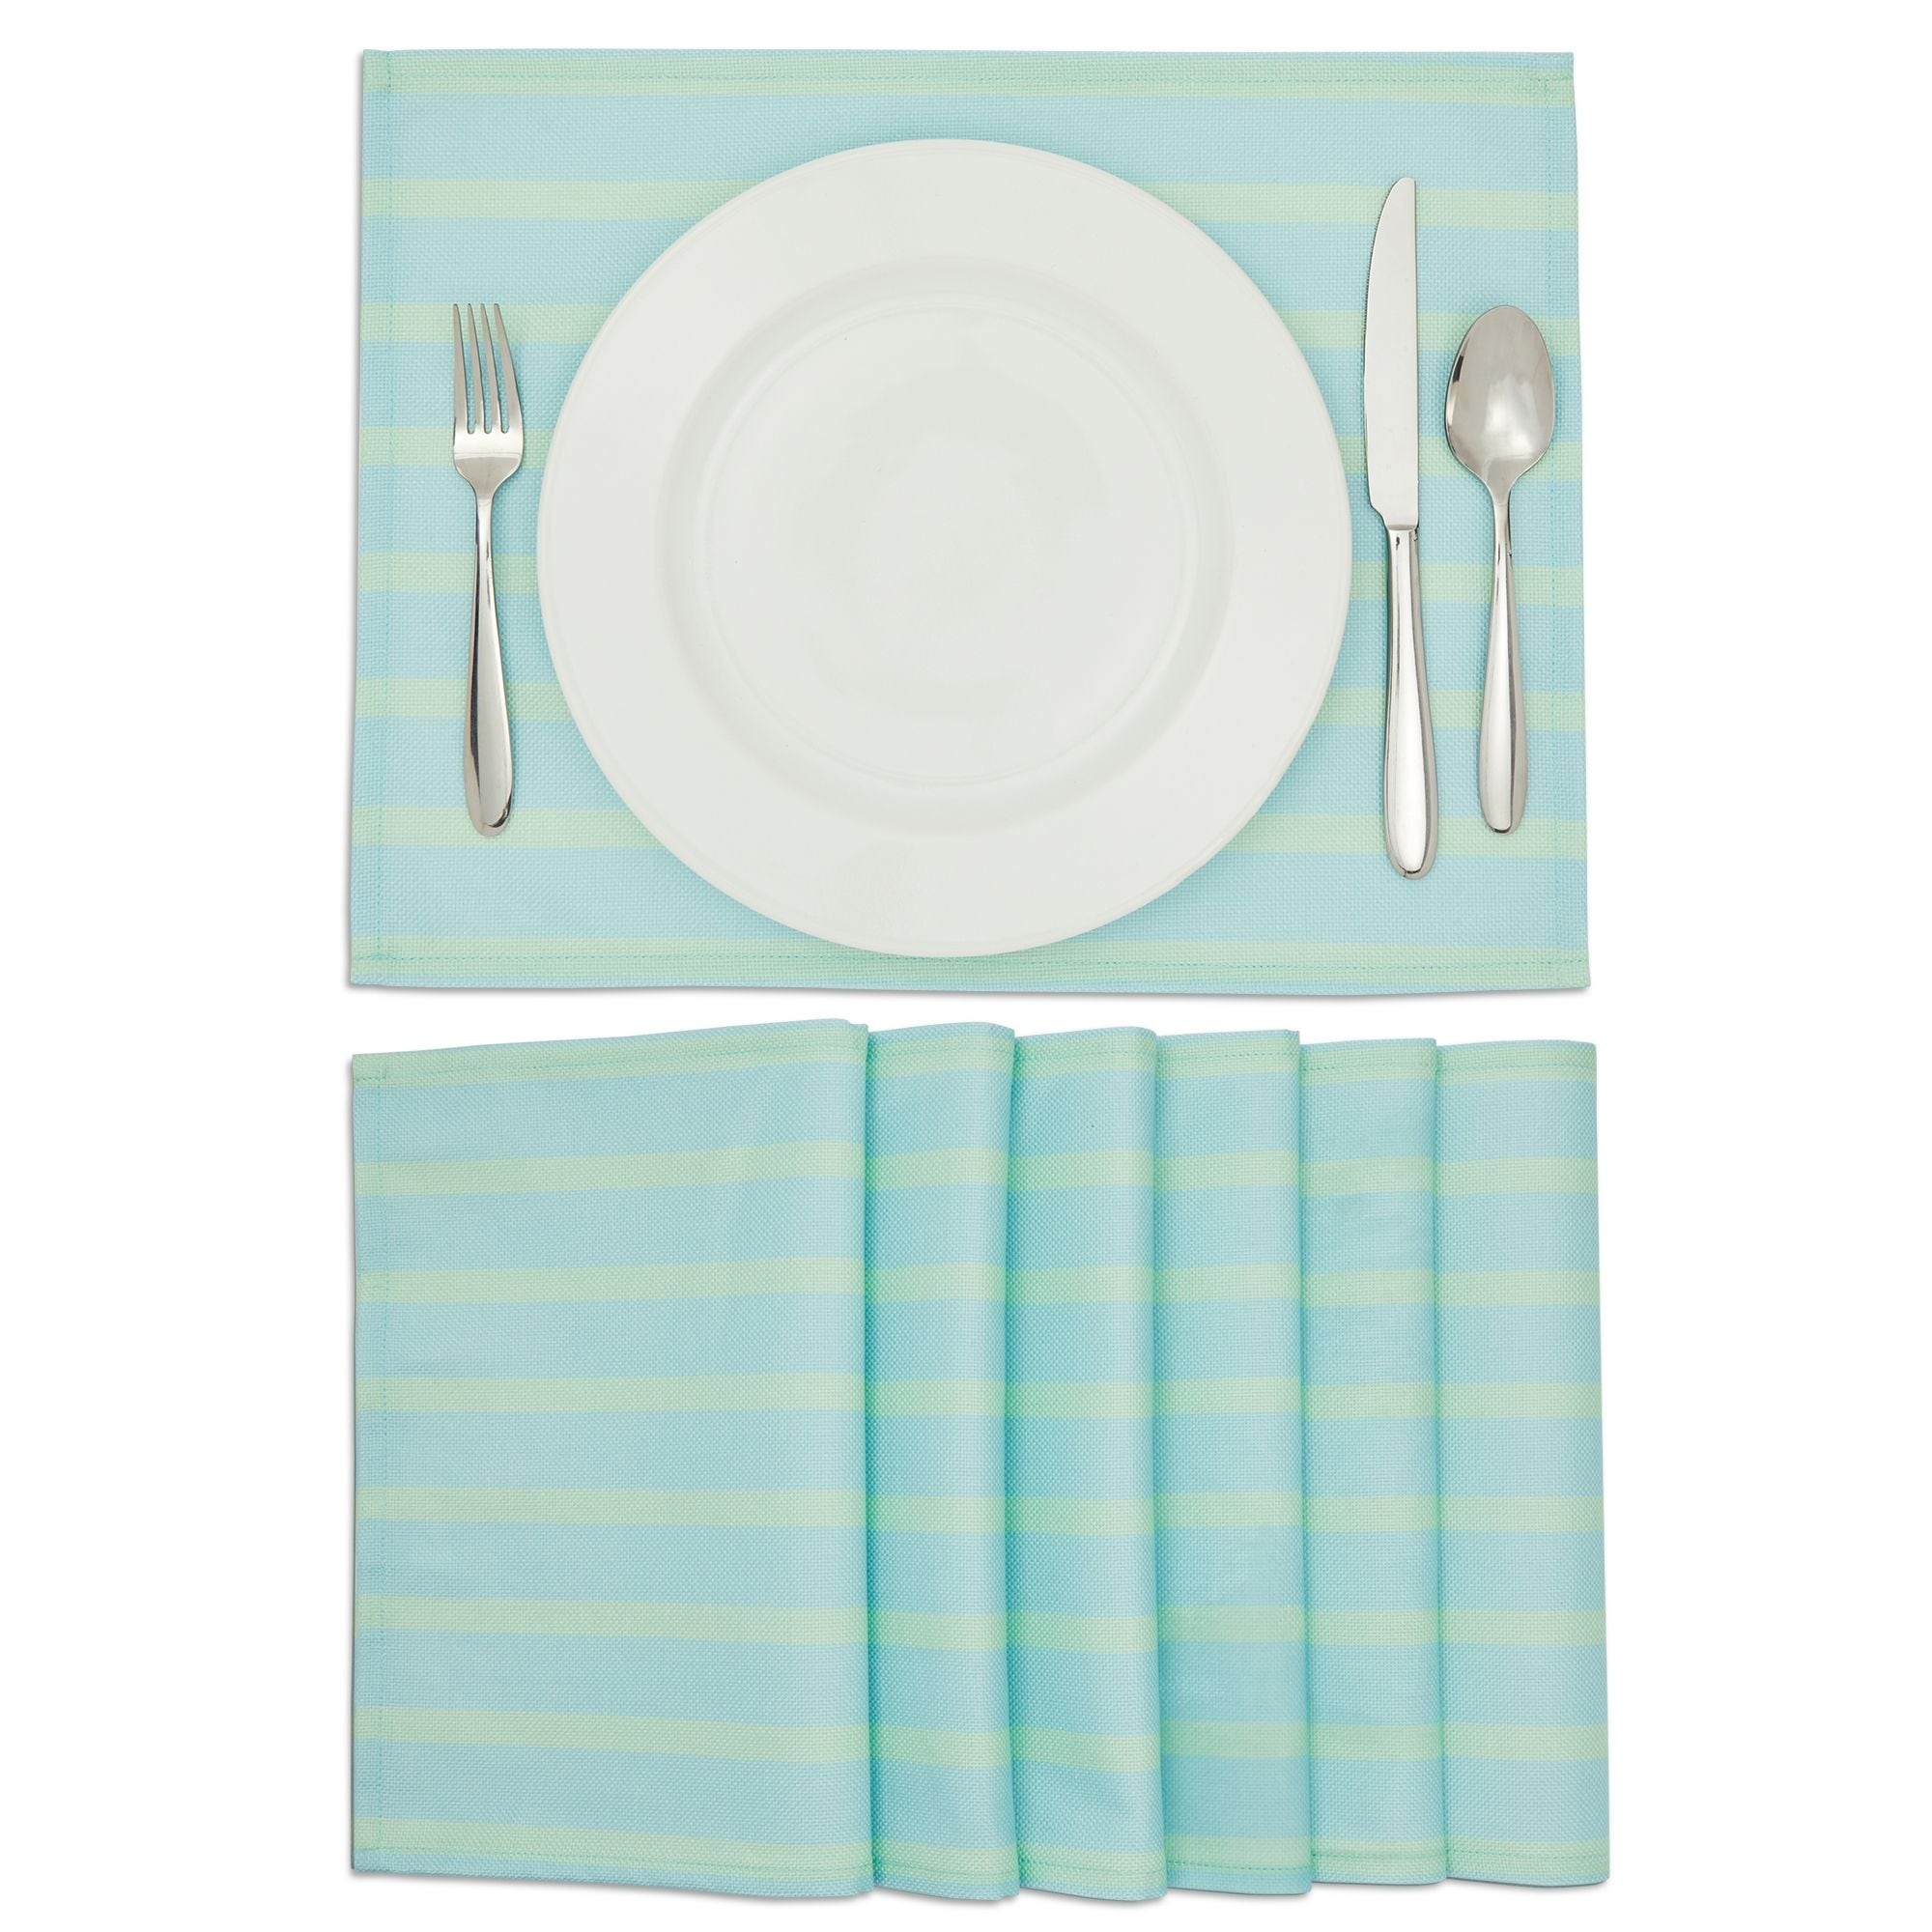 4th of July Day Holiday Placemats for Kitchen Dining Table Set of 6 Gifts Blue 